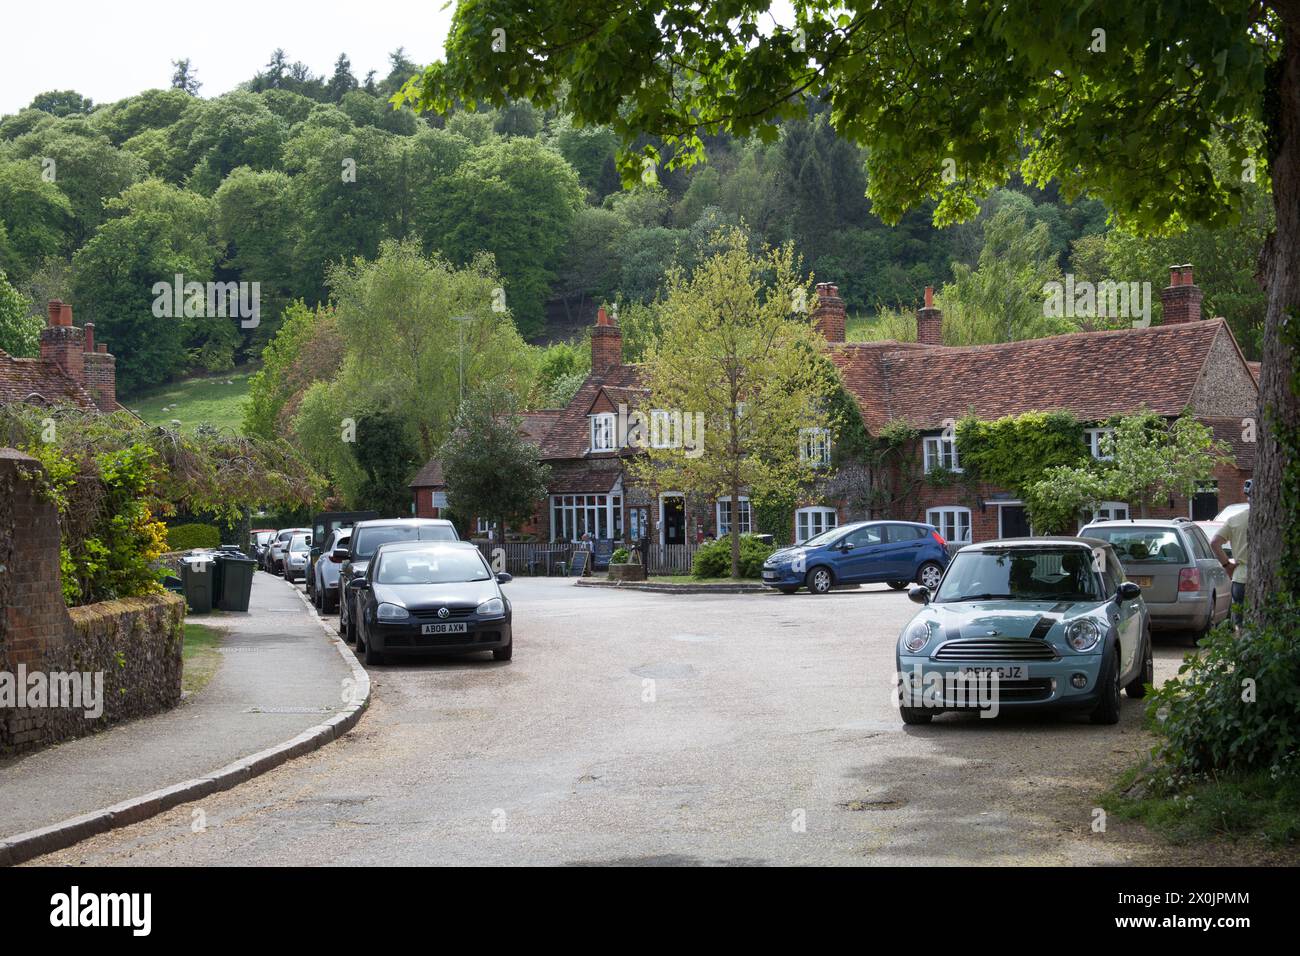 Views of the village of Hambleden, Buckinghamshire in the United Kingdom Stock Photo